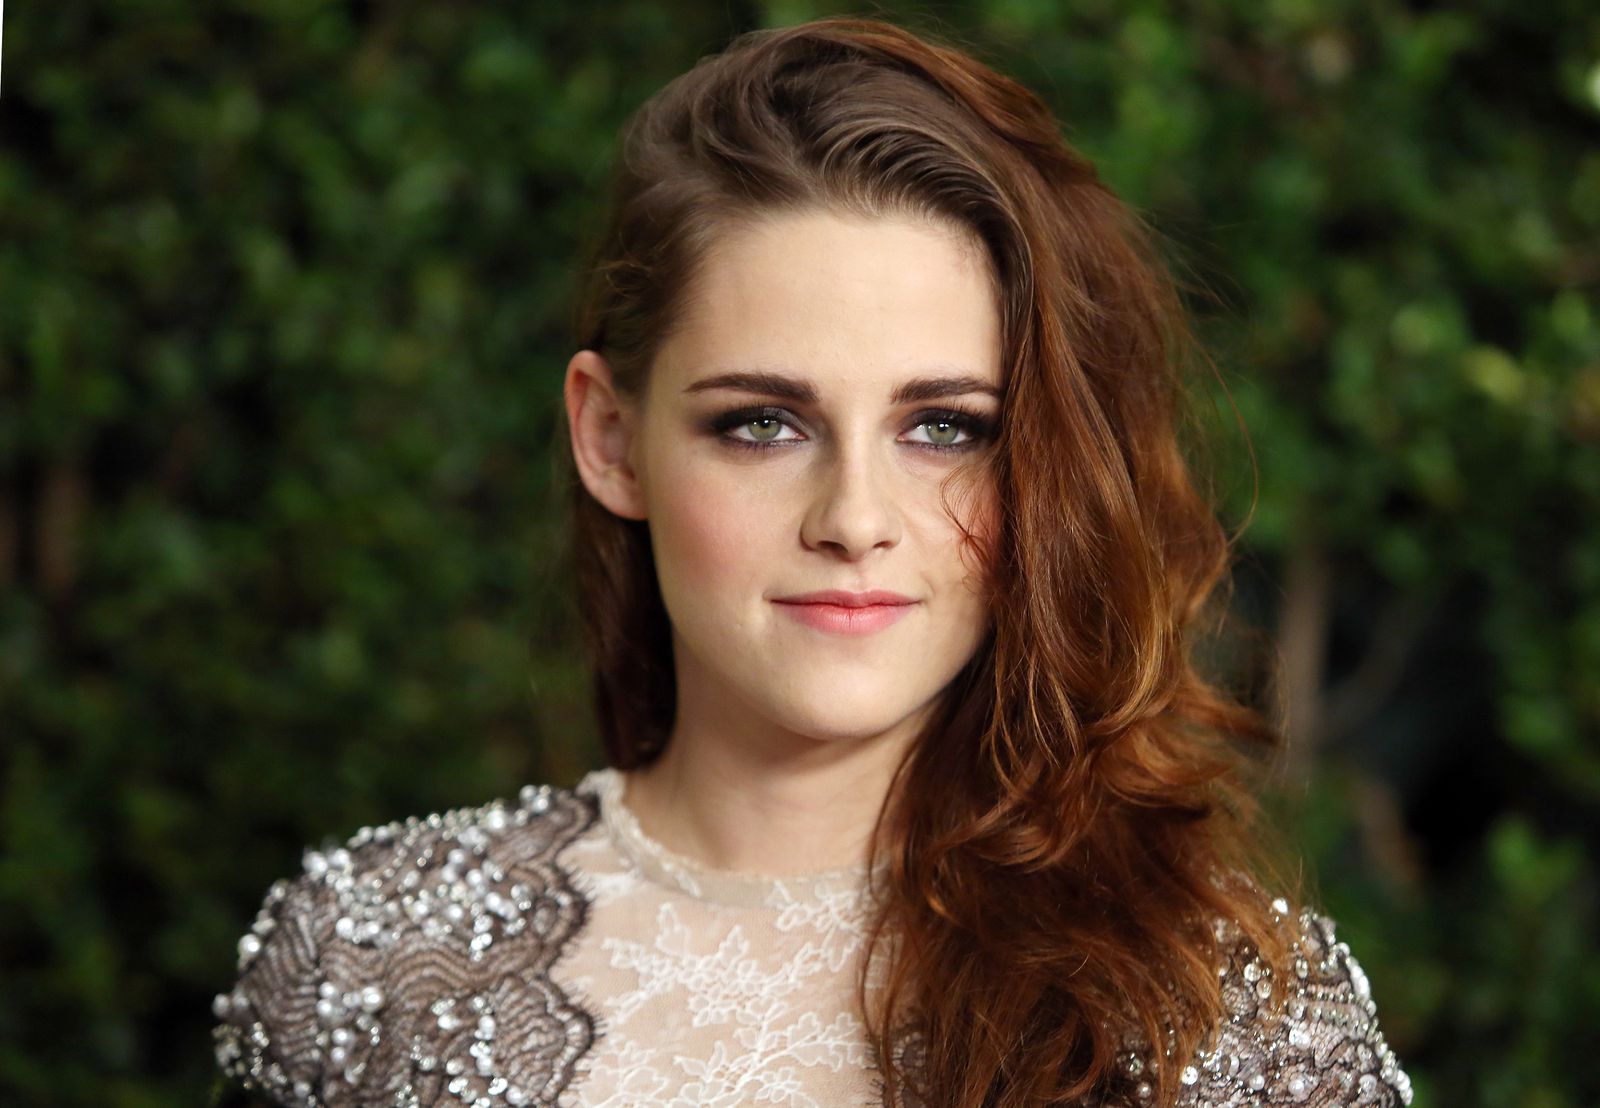 This Crazy Transformation of The Twilight Actress Kristen Stewart Will Leave You Amazed!